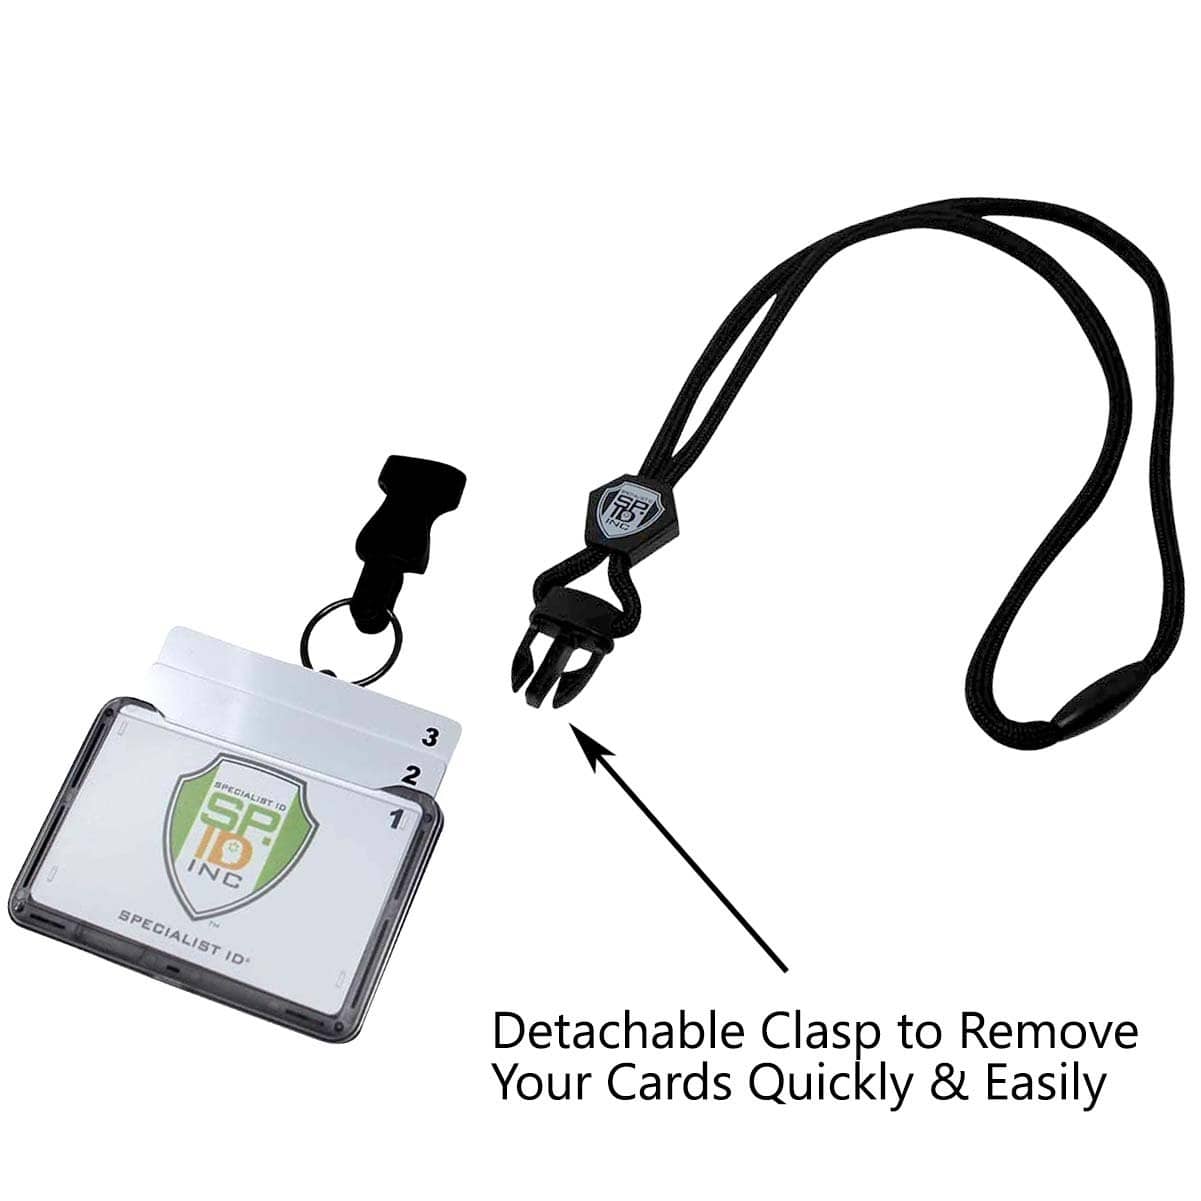 A Specialist ID Horizontal 3 Card Badge Holder & Heavy Duty Lanyard with Breakaway Clip and Key Ring - Hard Plastic Rigid Name Tag Protector -Top Load for Three Badges is shown next to a clear badge holder containing cards numbered 1, 2, and 3. Text reads: "Detachable Clasp to Remove Your Cards Quickly & Easily". Perfect for professional work wear.